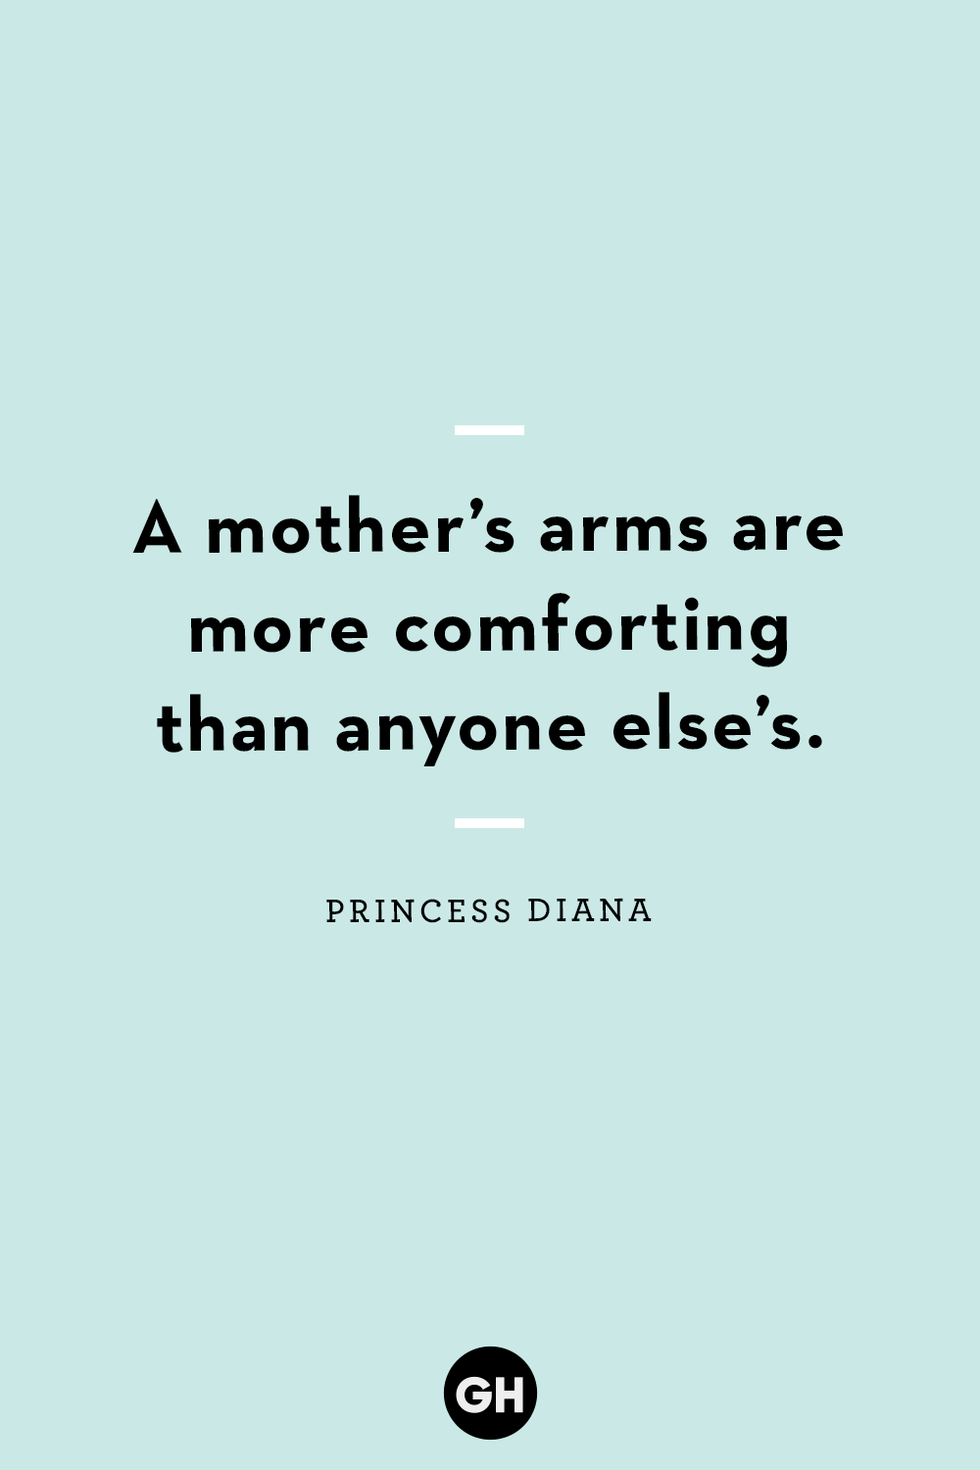 100 Best Mom Quotes of 2023: Funny Mom Quotes, Strong Mom Quotes